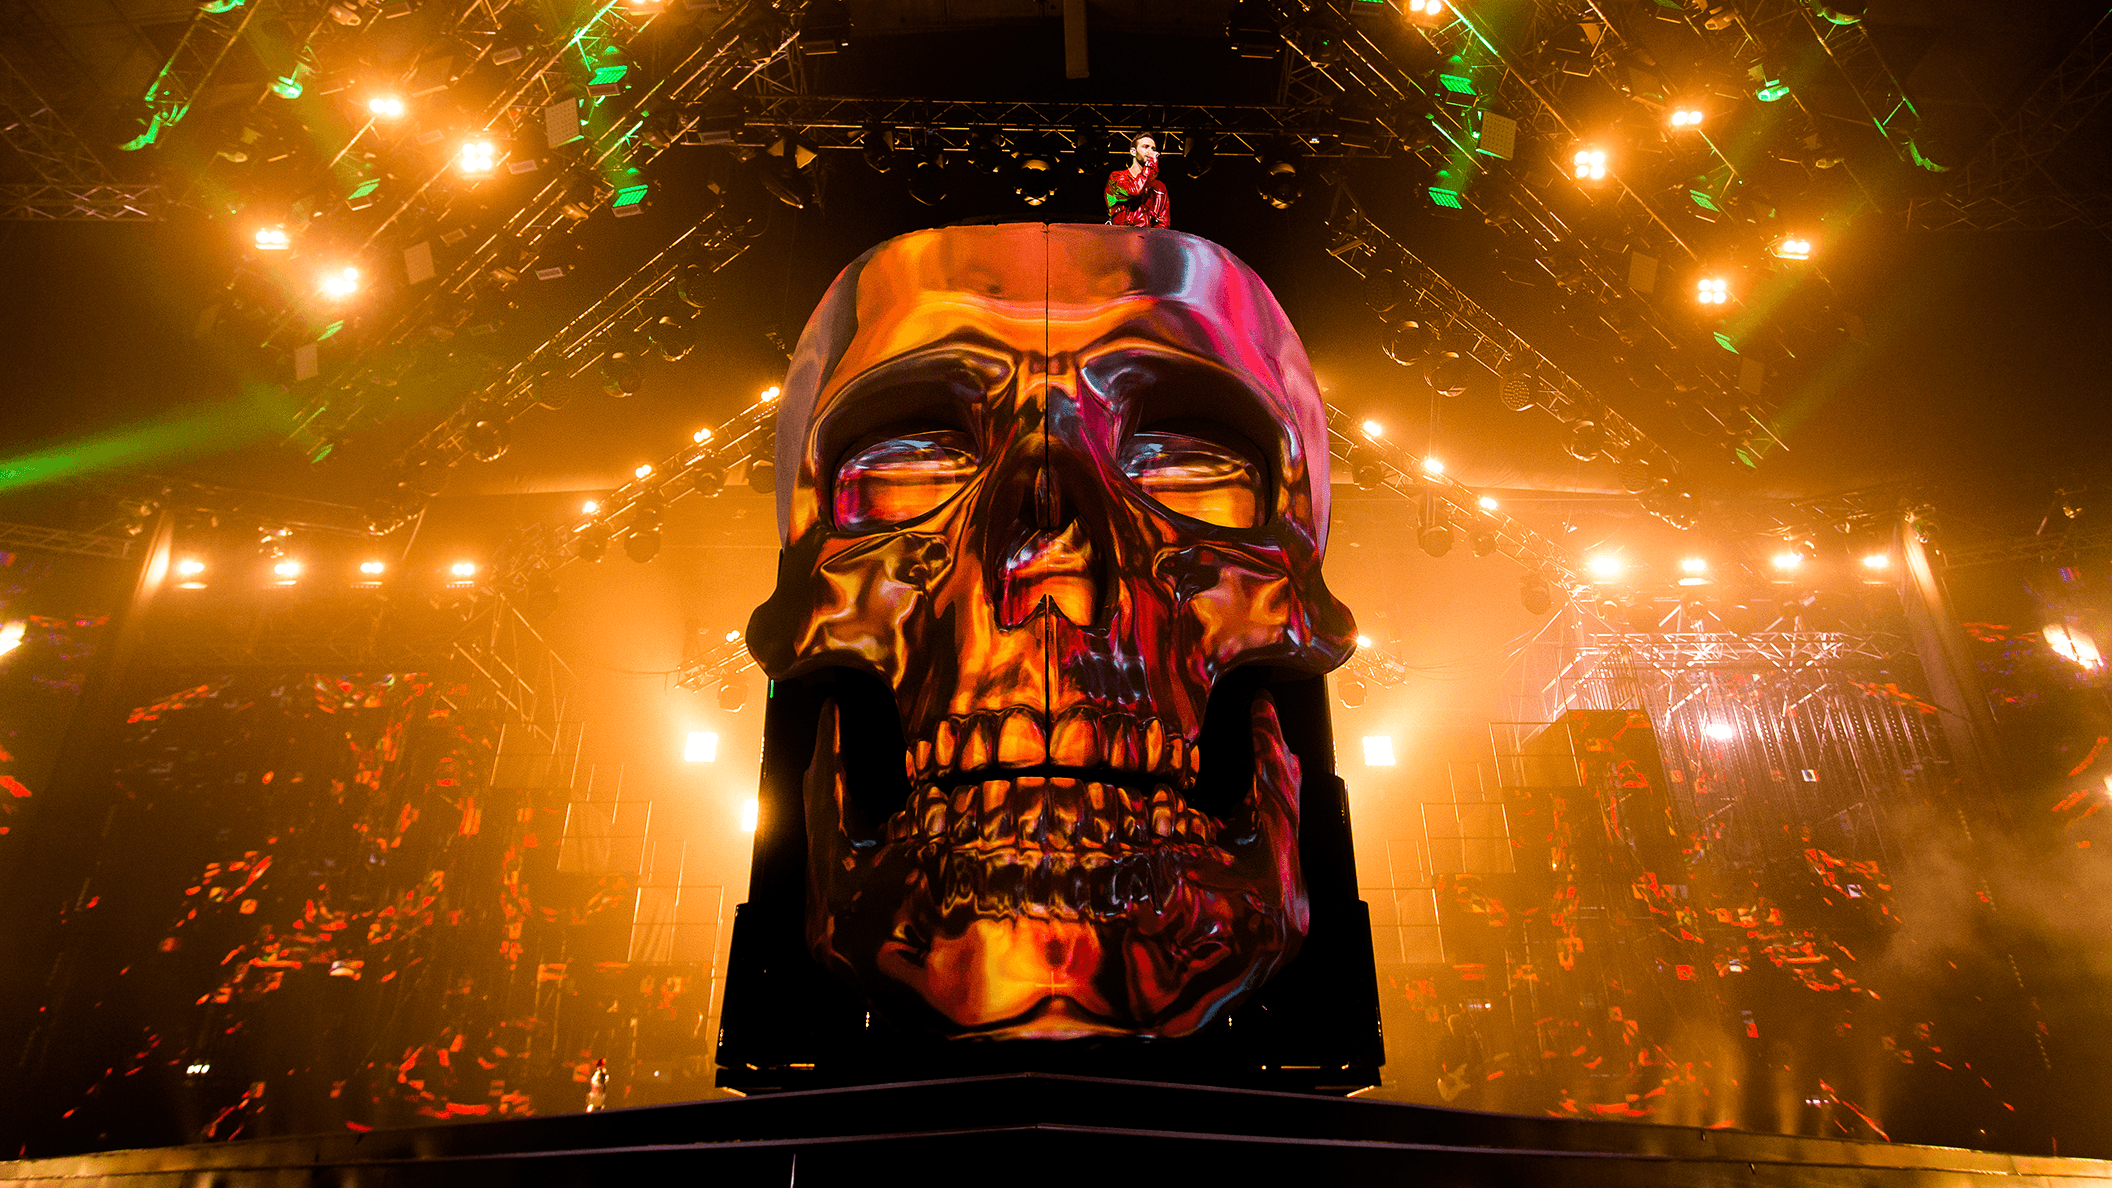 Screenberry-powered 3D mapping on a skull-shaped stage prop during a Max Barskih concert